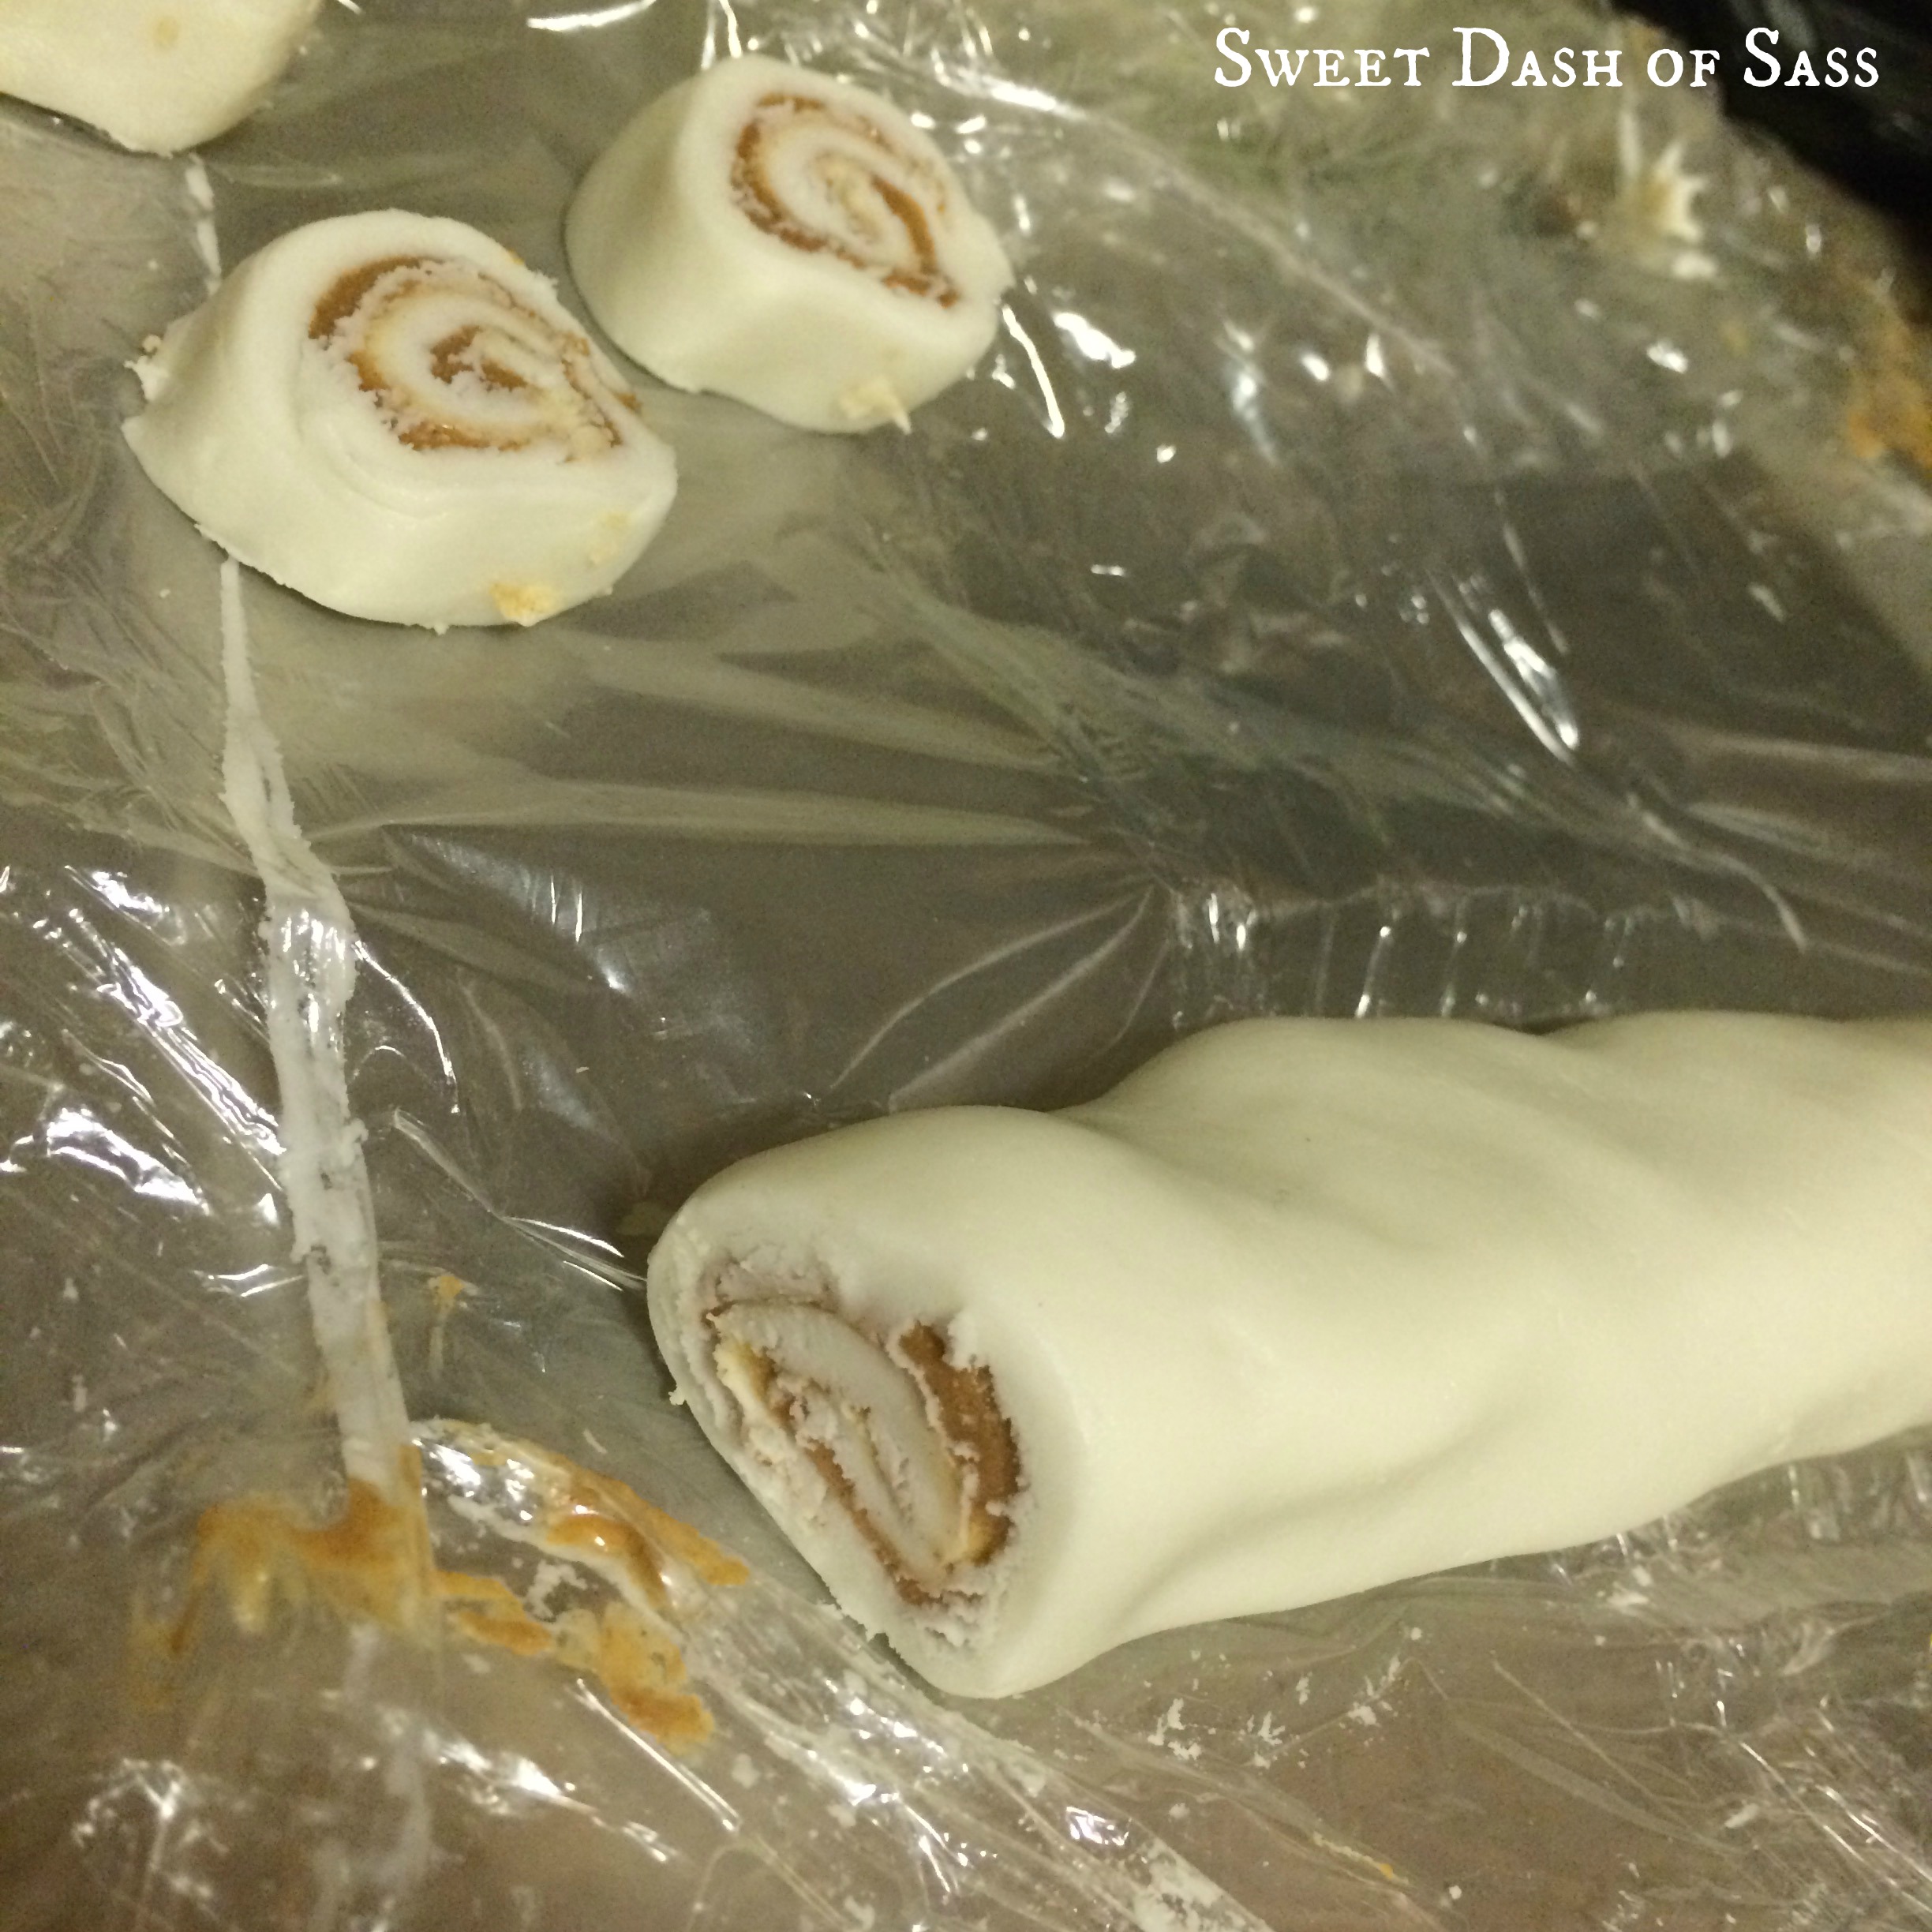 Peanut Butter Meltaway - a unique candy to add to those holiday platters this season.  Only 4 ingredients!!  #25DaysCookieStyle www.SweetDashofSass.com